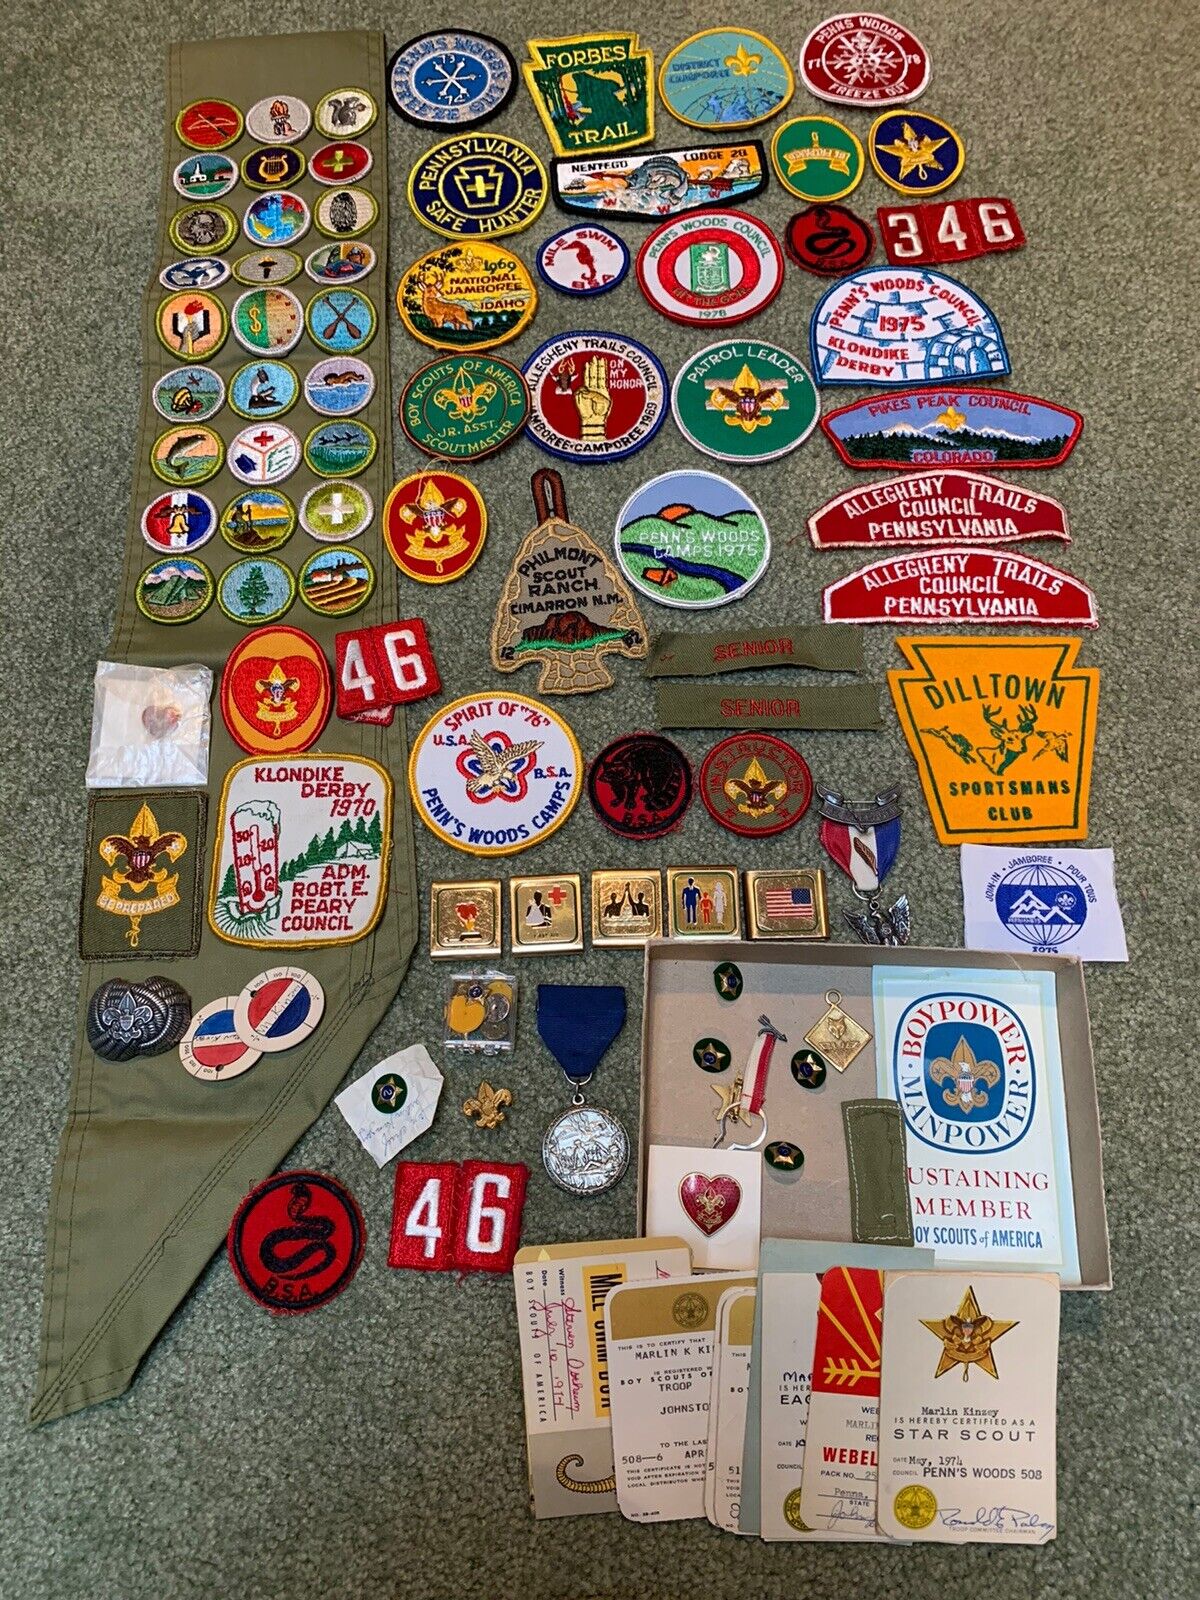 Vintage 1970’s Over 60 Boy Scouts BSA Patches Sash lot Estate Find Medals, Pins